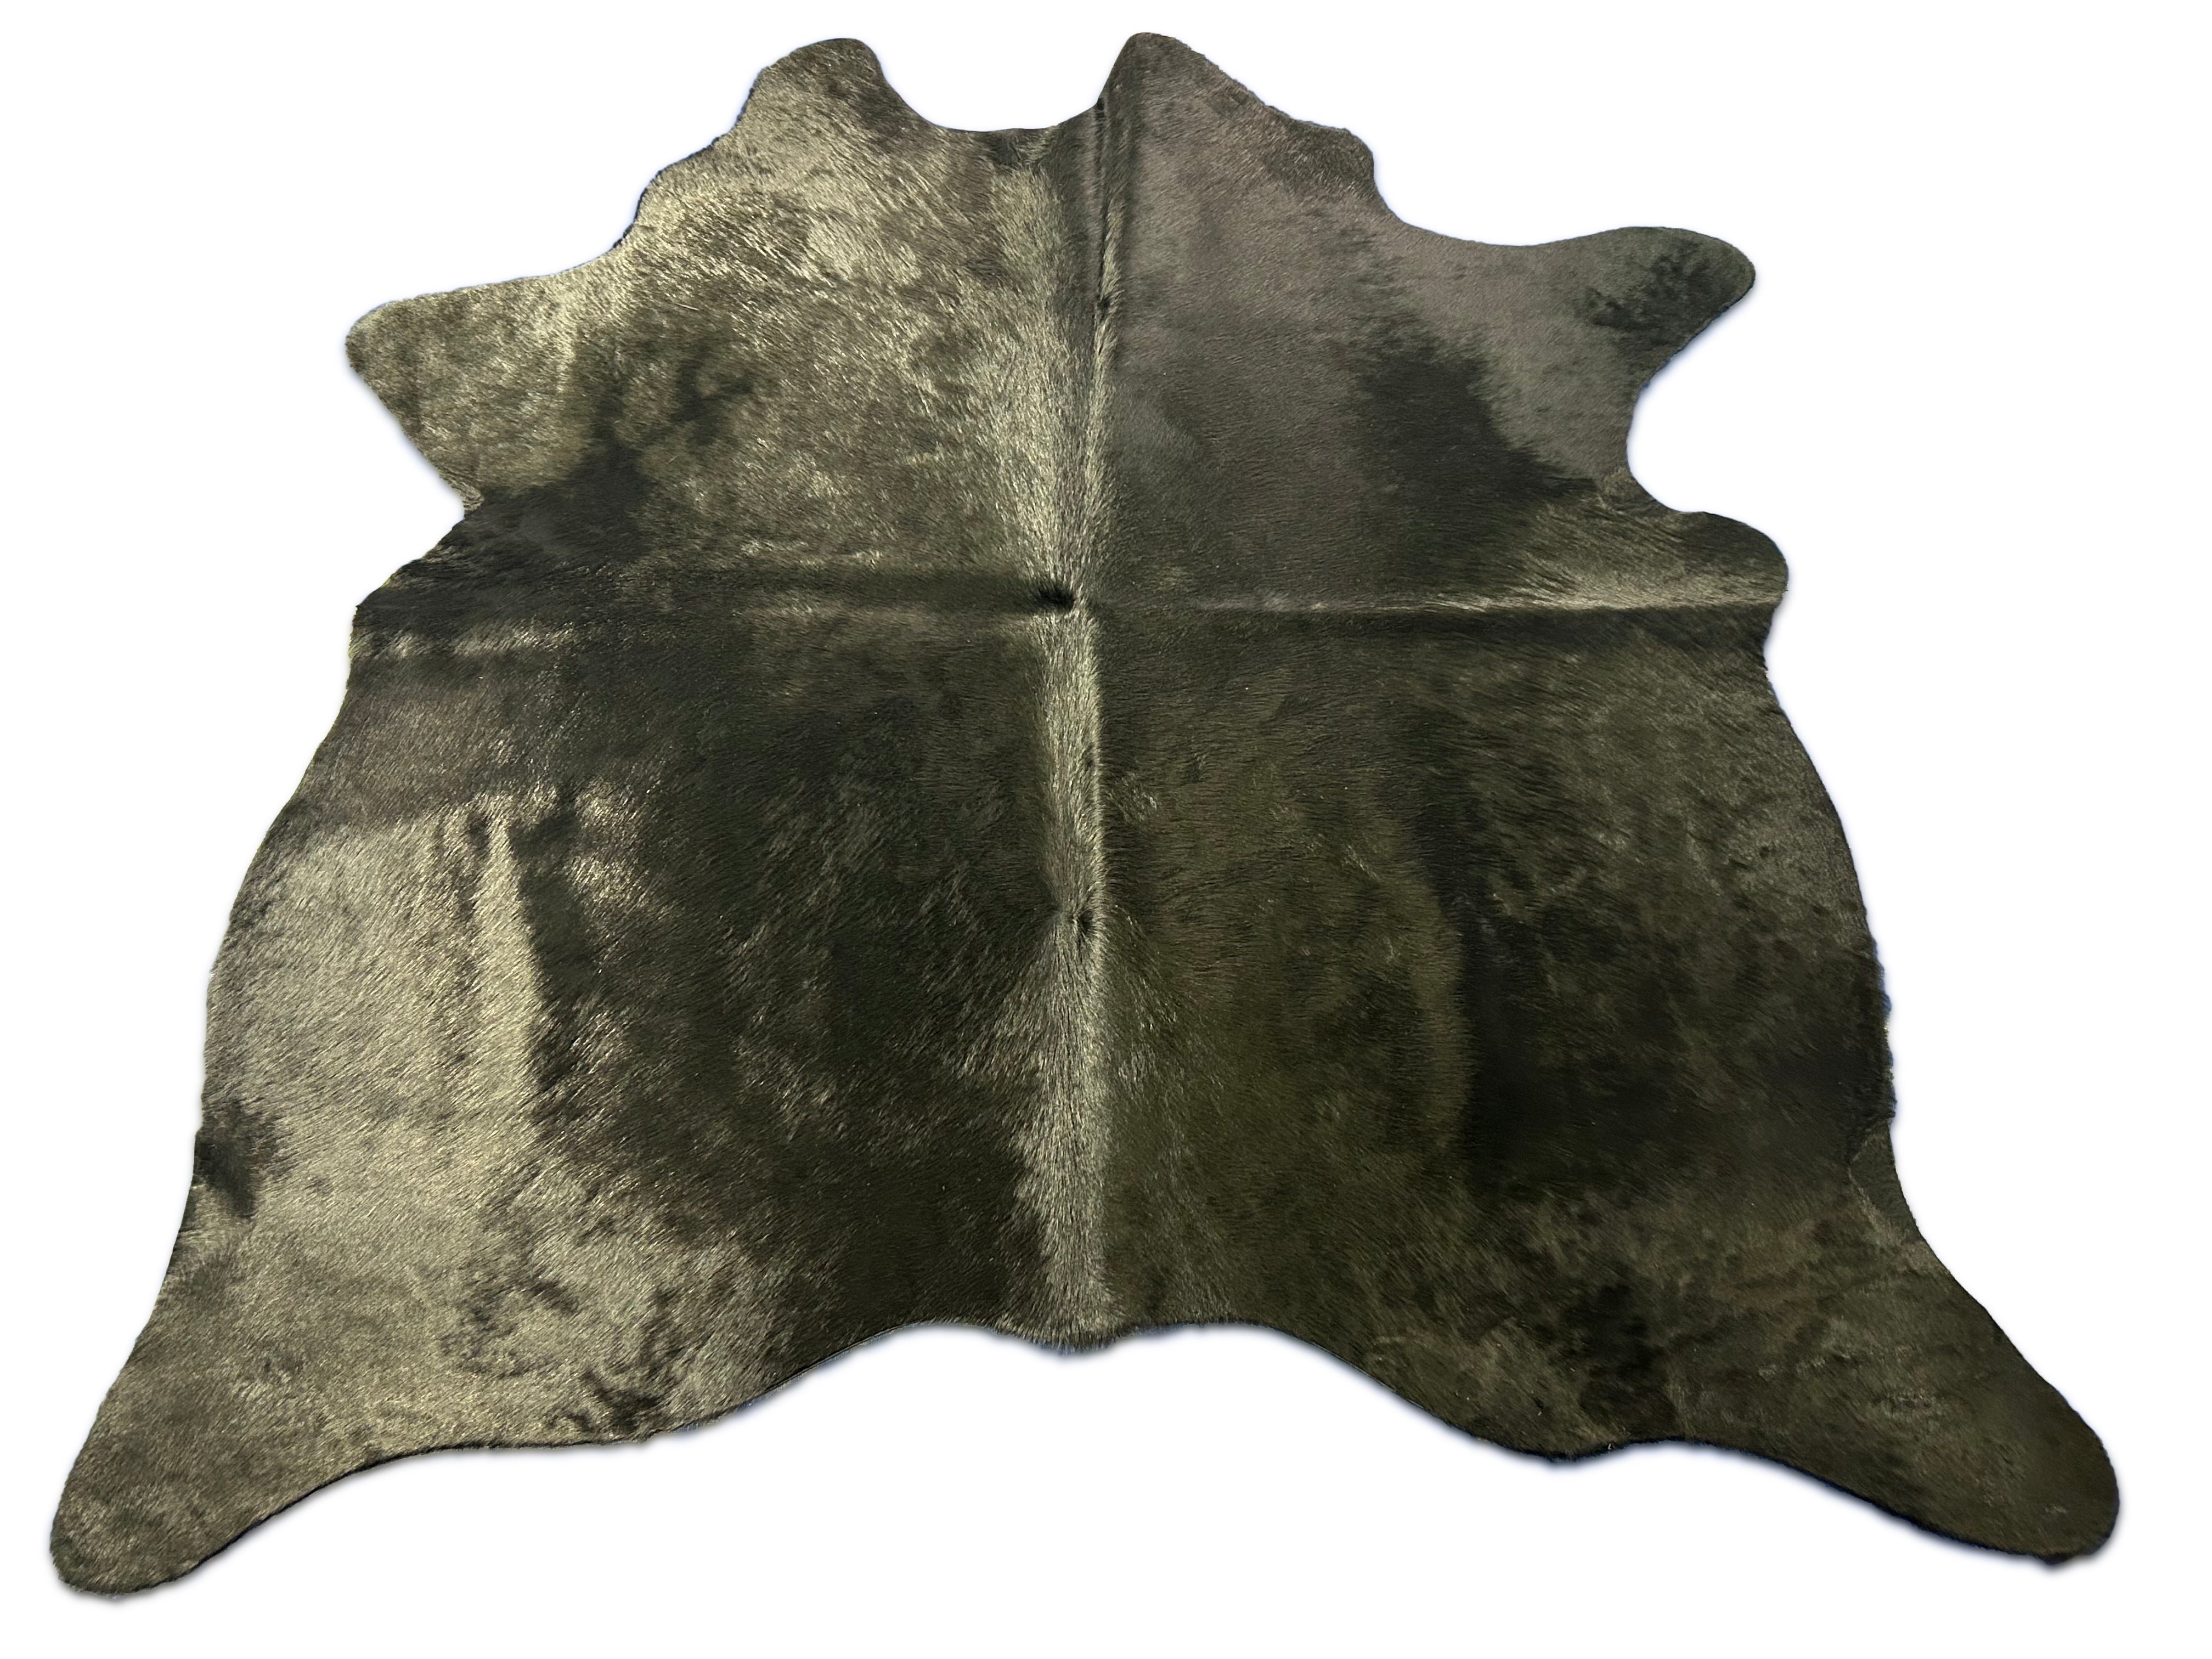 Dyed Solid Black Cowhide Rug Size: 5.7x5.7 feet C-1722